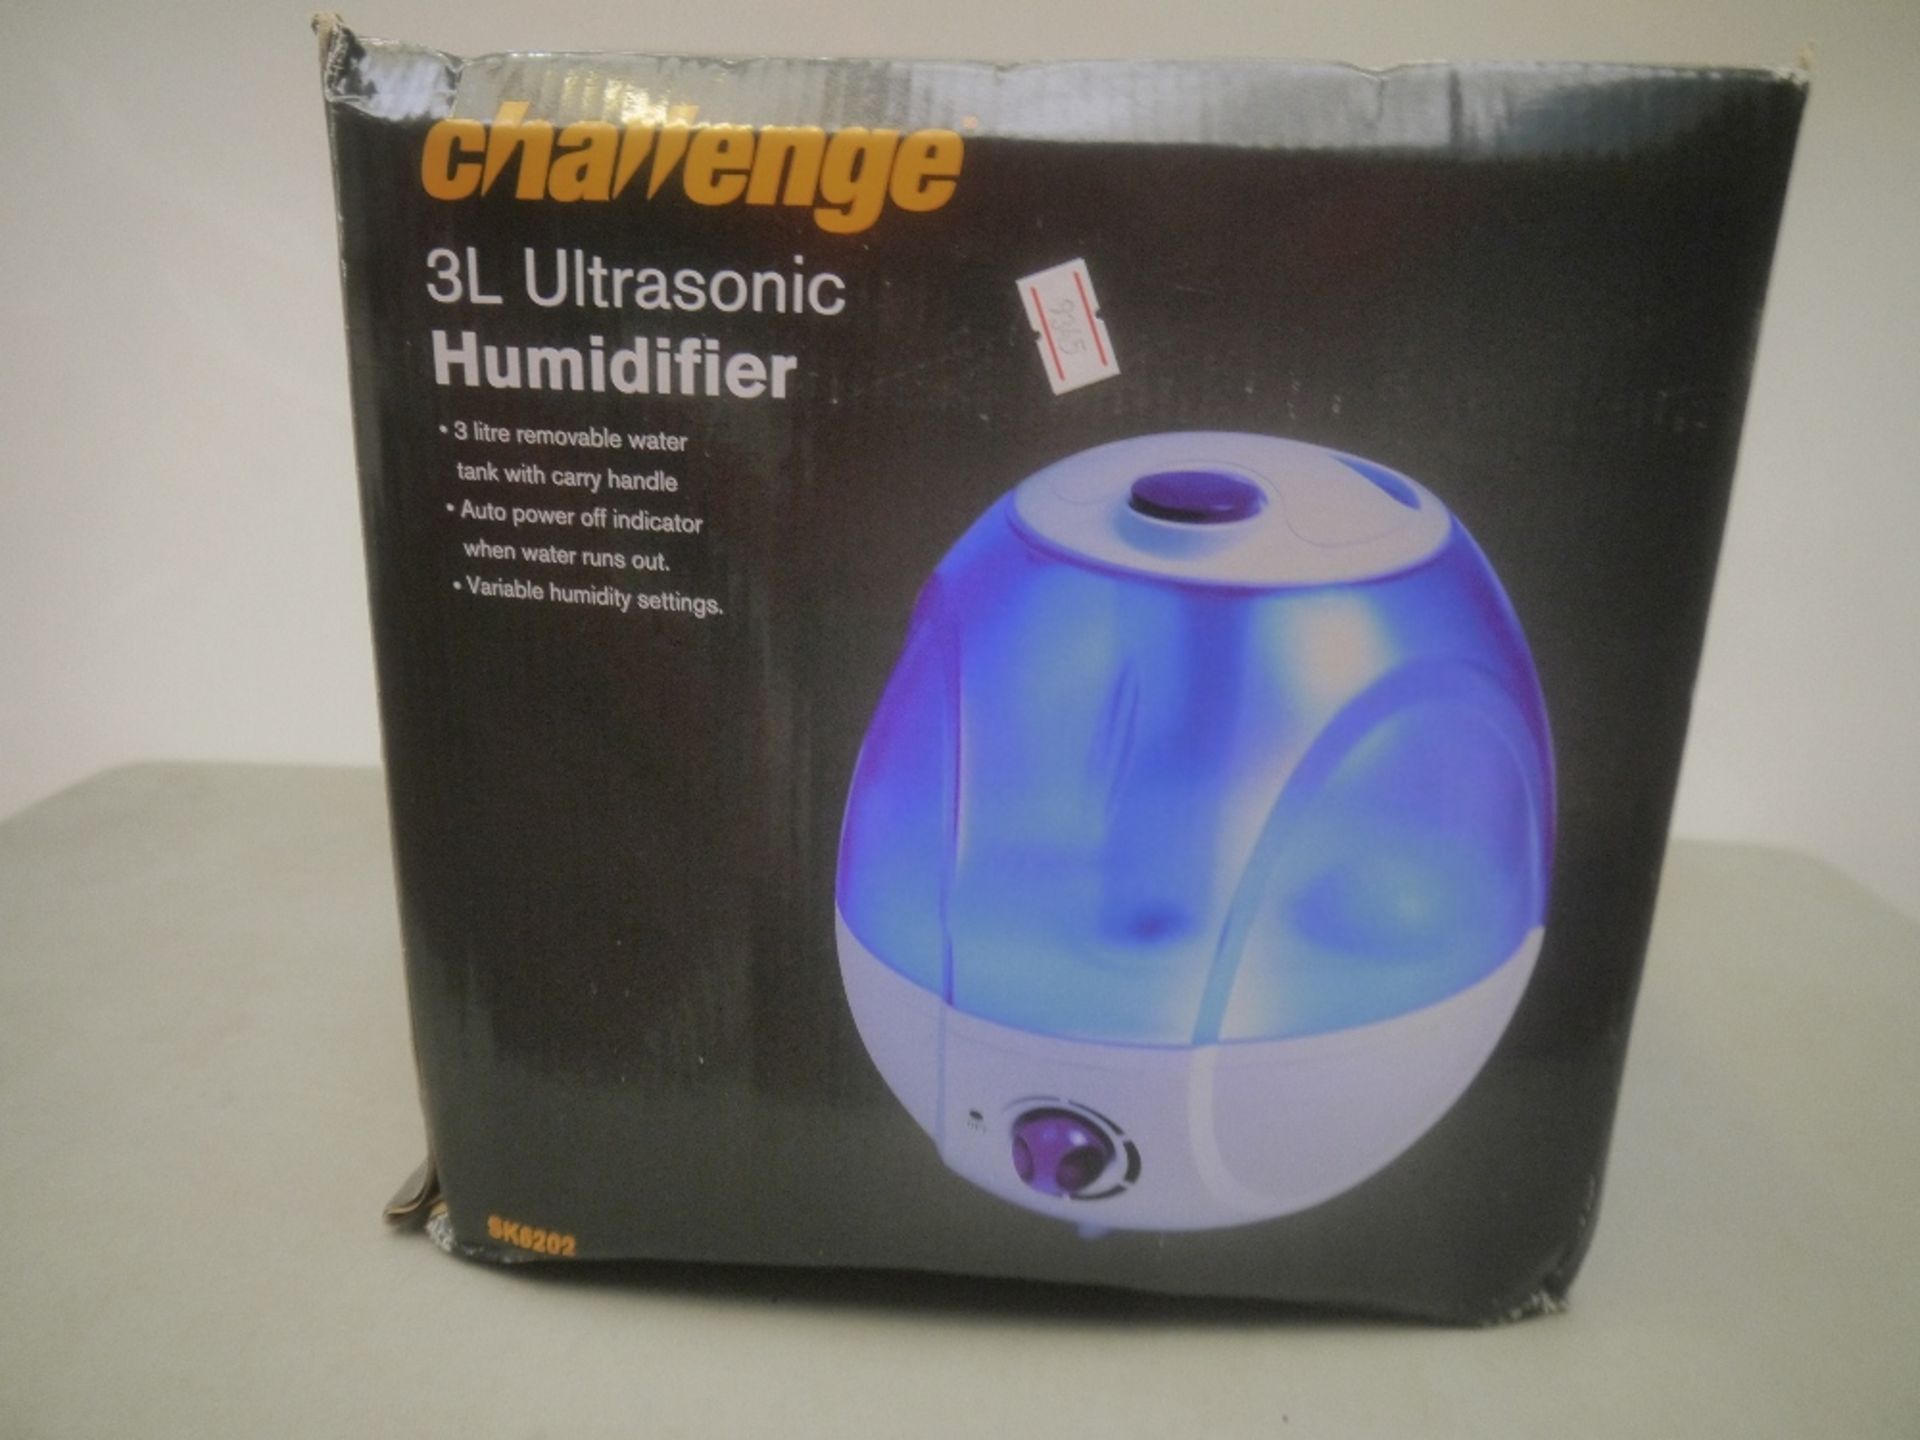 Challenge 3L ultrasonic humidifier, unchecked and boxed.